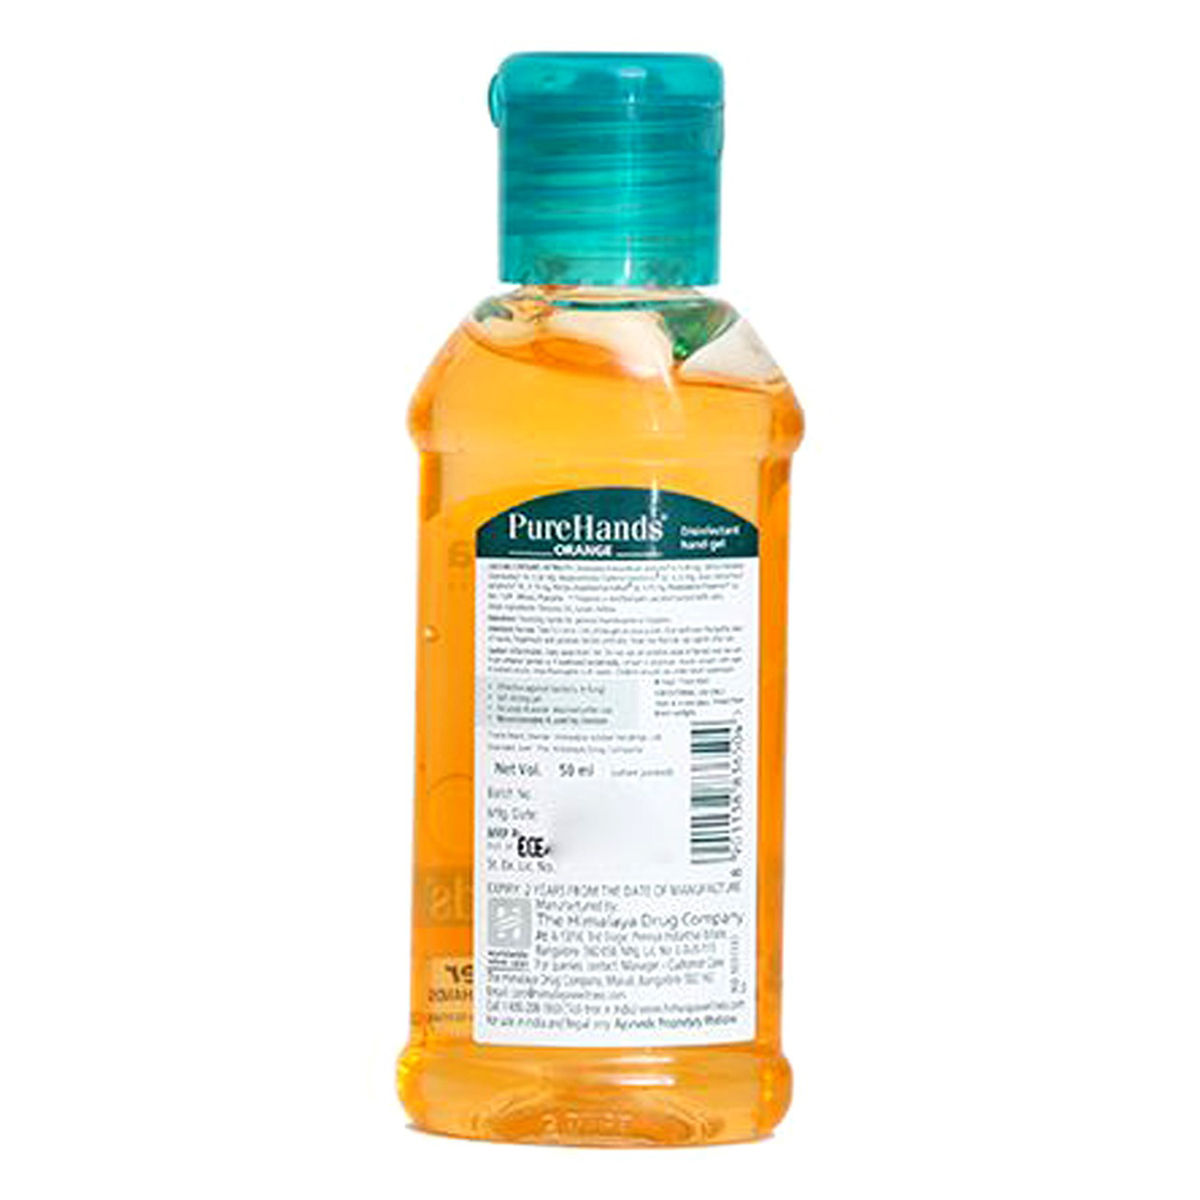 Himalaya Pure Hands Orange Flavour Hand Sanitizer, 50 ml, Pack of 1 